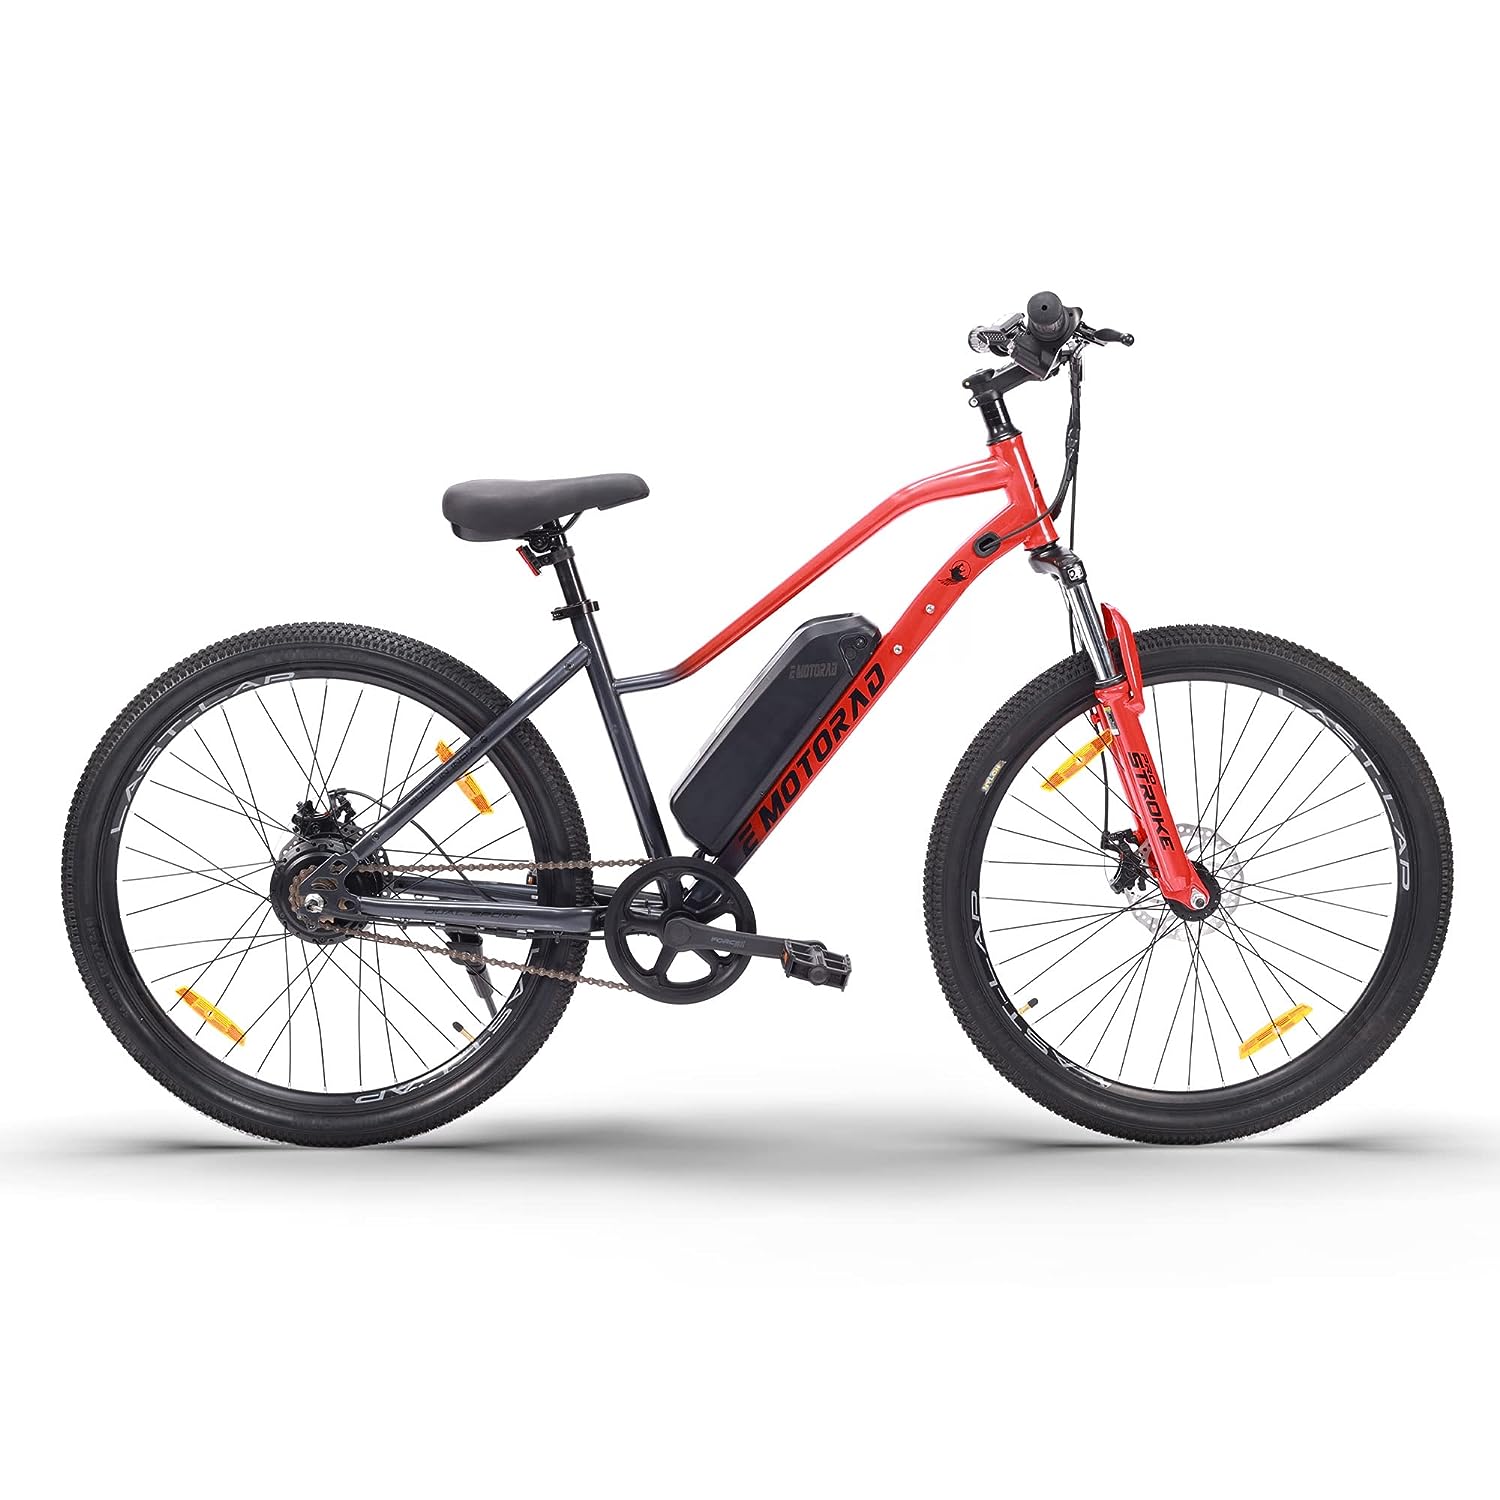 EMotorad X2 Mountain Electric Cycle (16" Frame, 7.65Ah Li-Ion Removable Battery, Front Suspension, LCD Display, 250W Motor) (Warm Red)